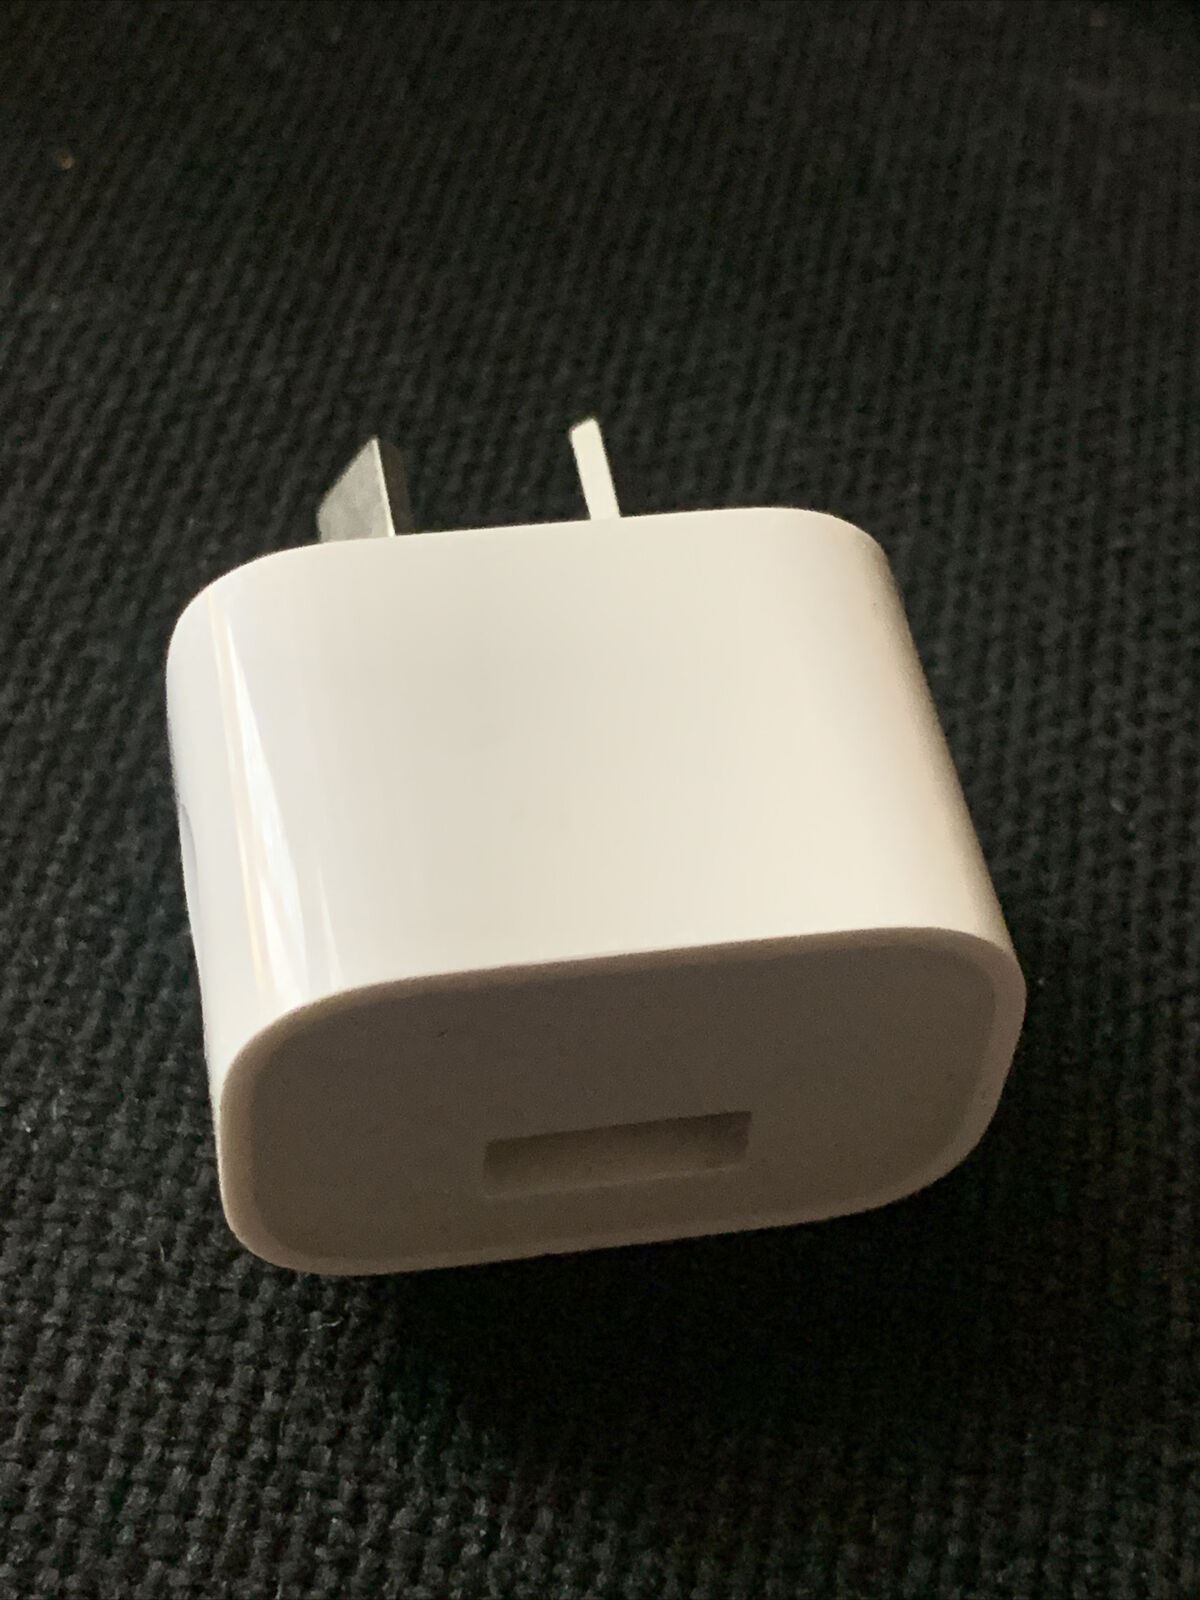 Genuine Apple A1444 5W USB Power Adapter Wall Charger - White